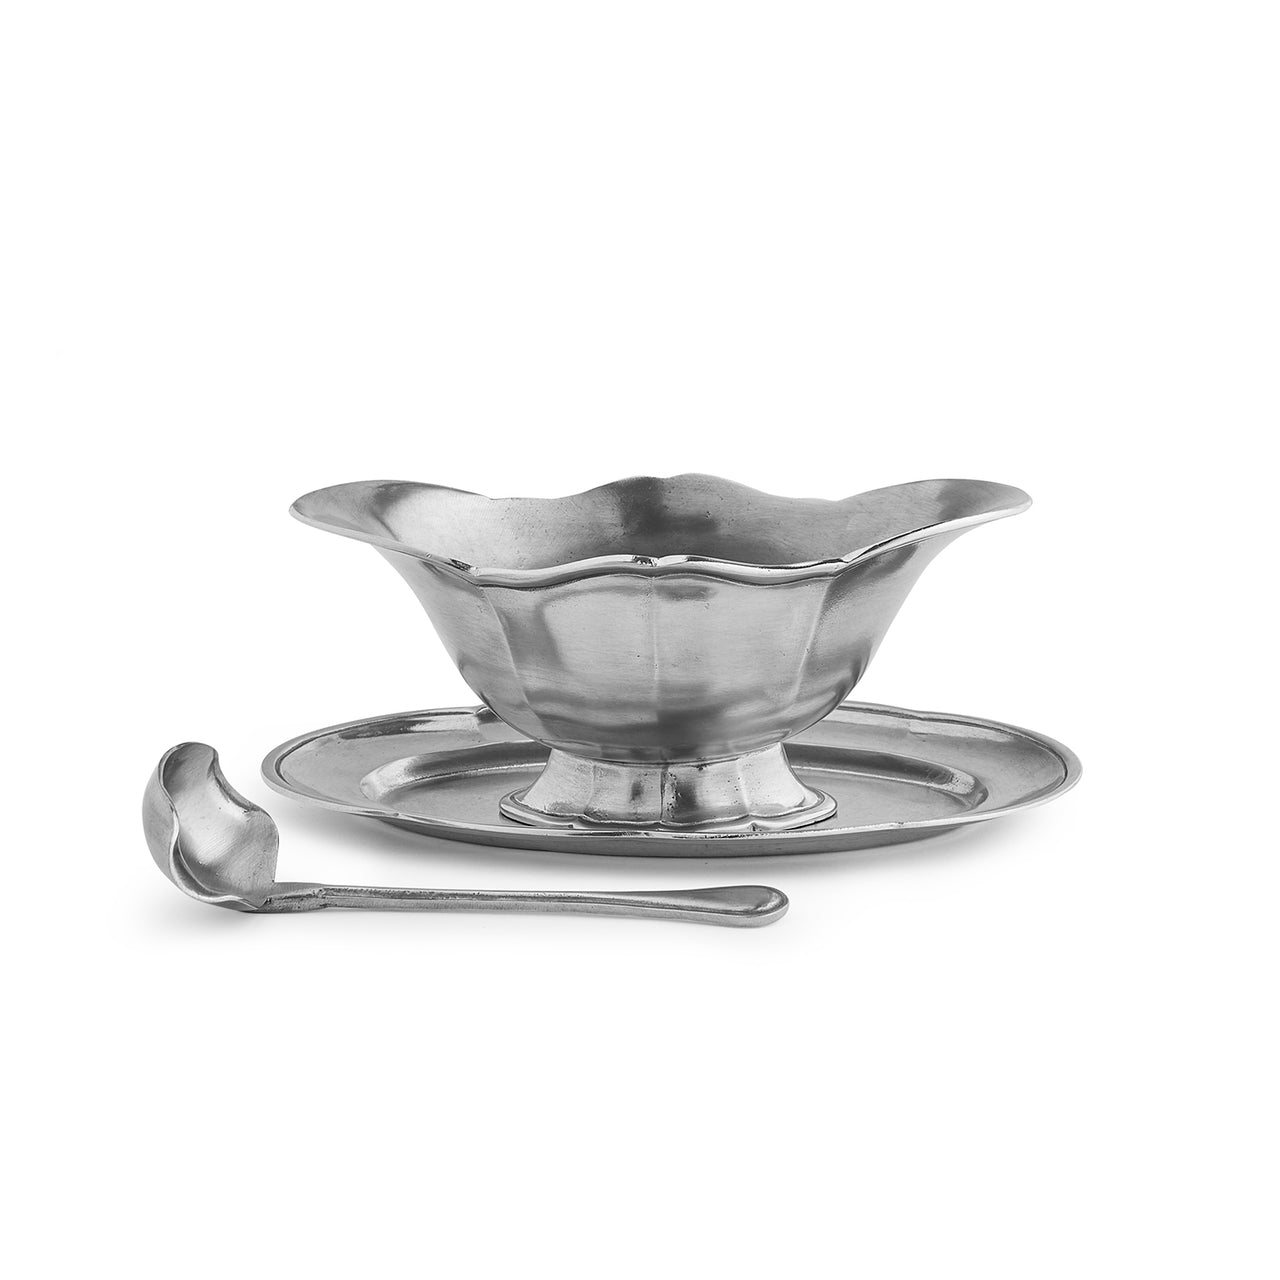 Tavola Pewter Gravy Boat with Tray and Ladle